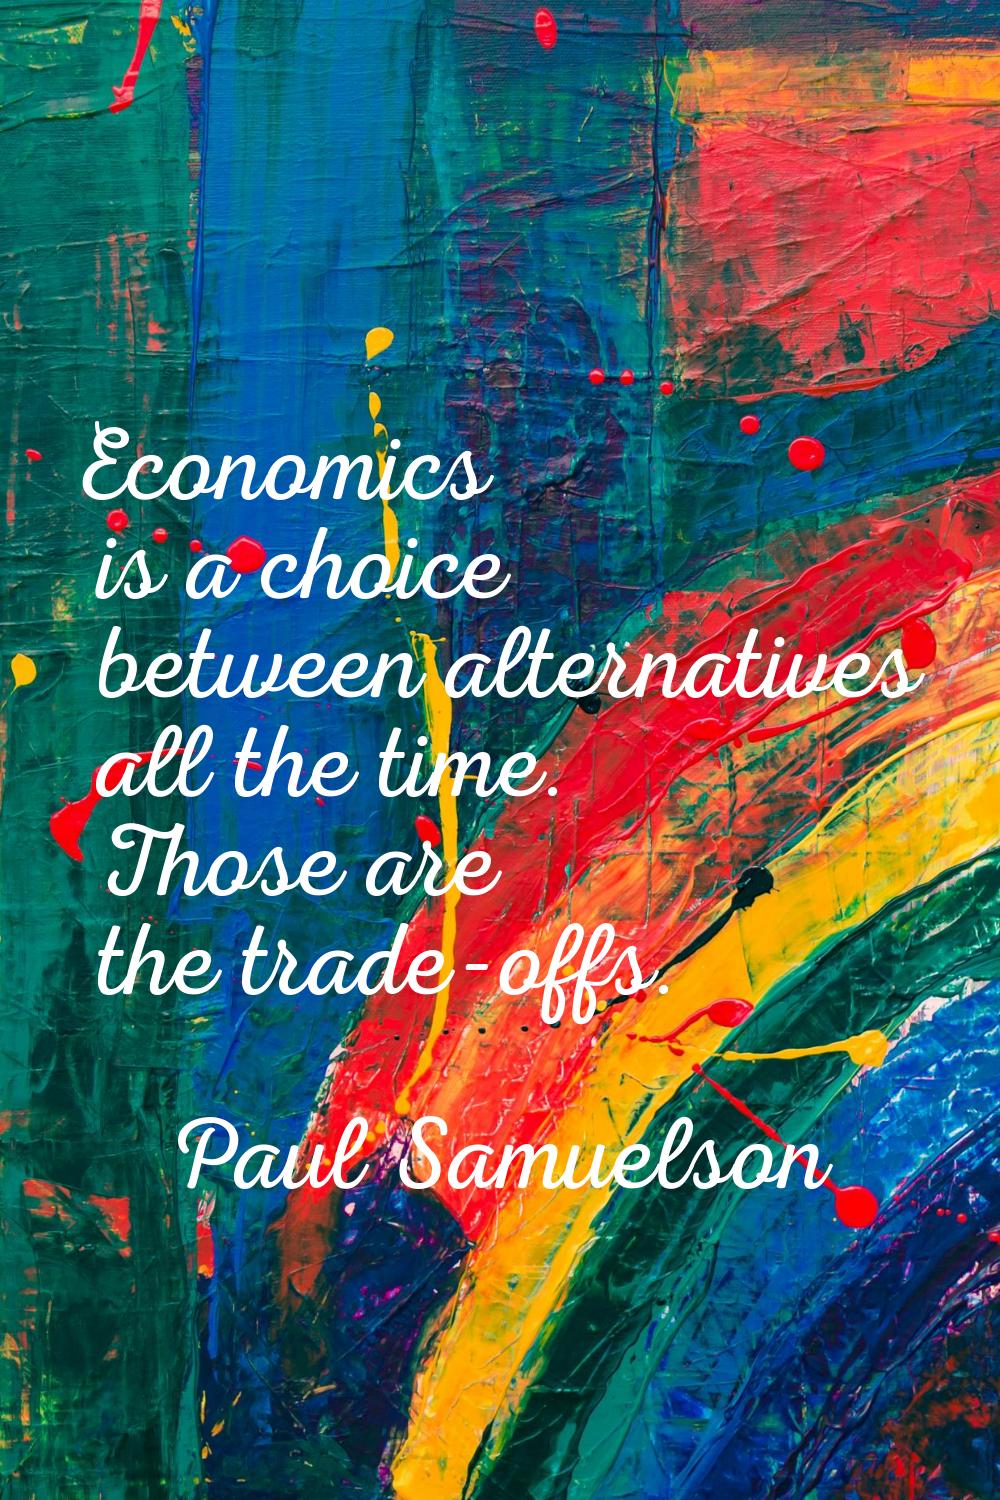 Economics is a choice between alternatives all the time. Those are the trade-offs.